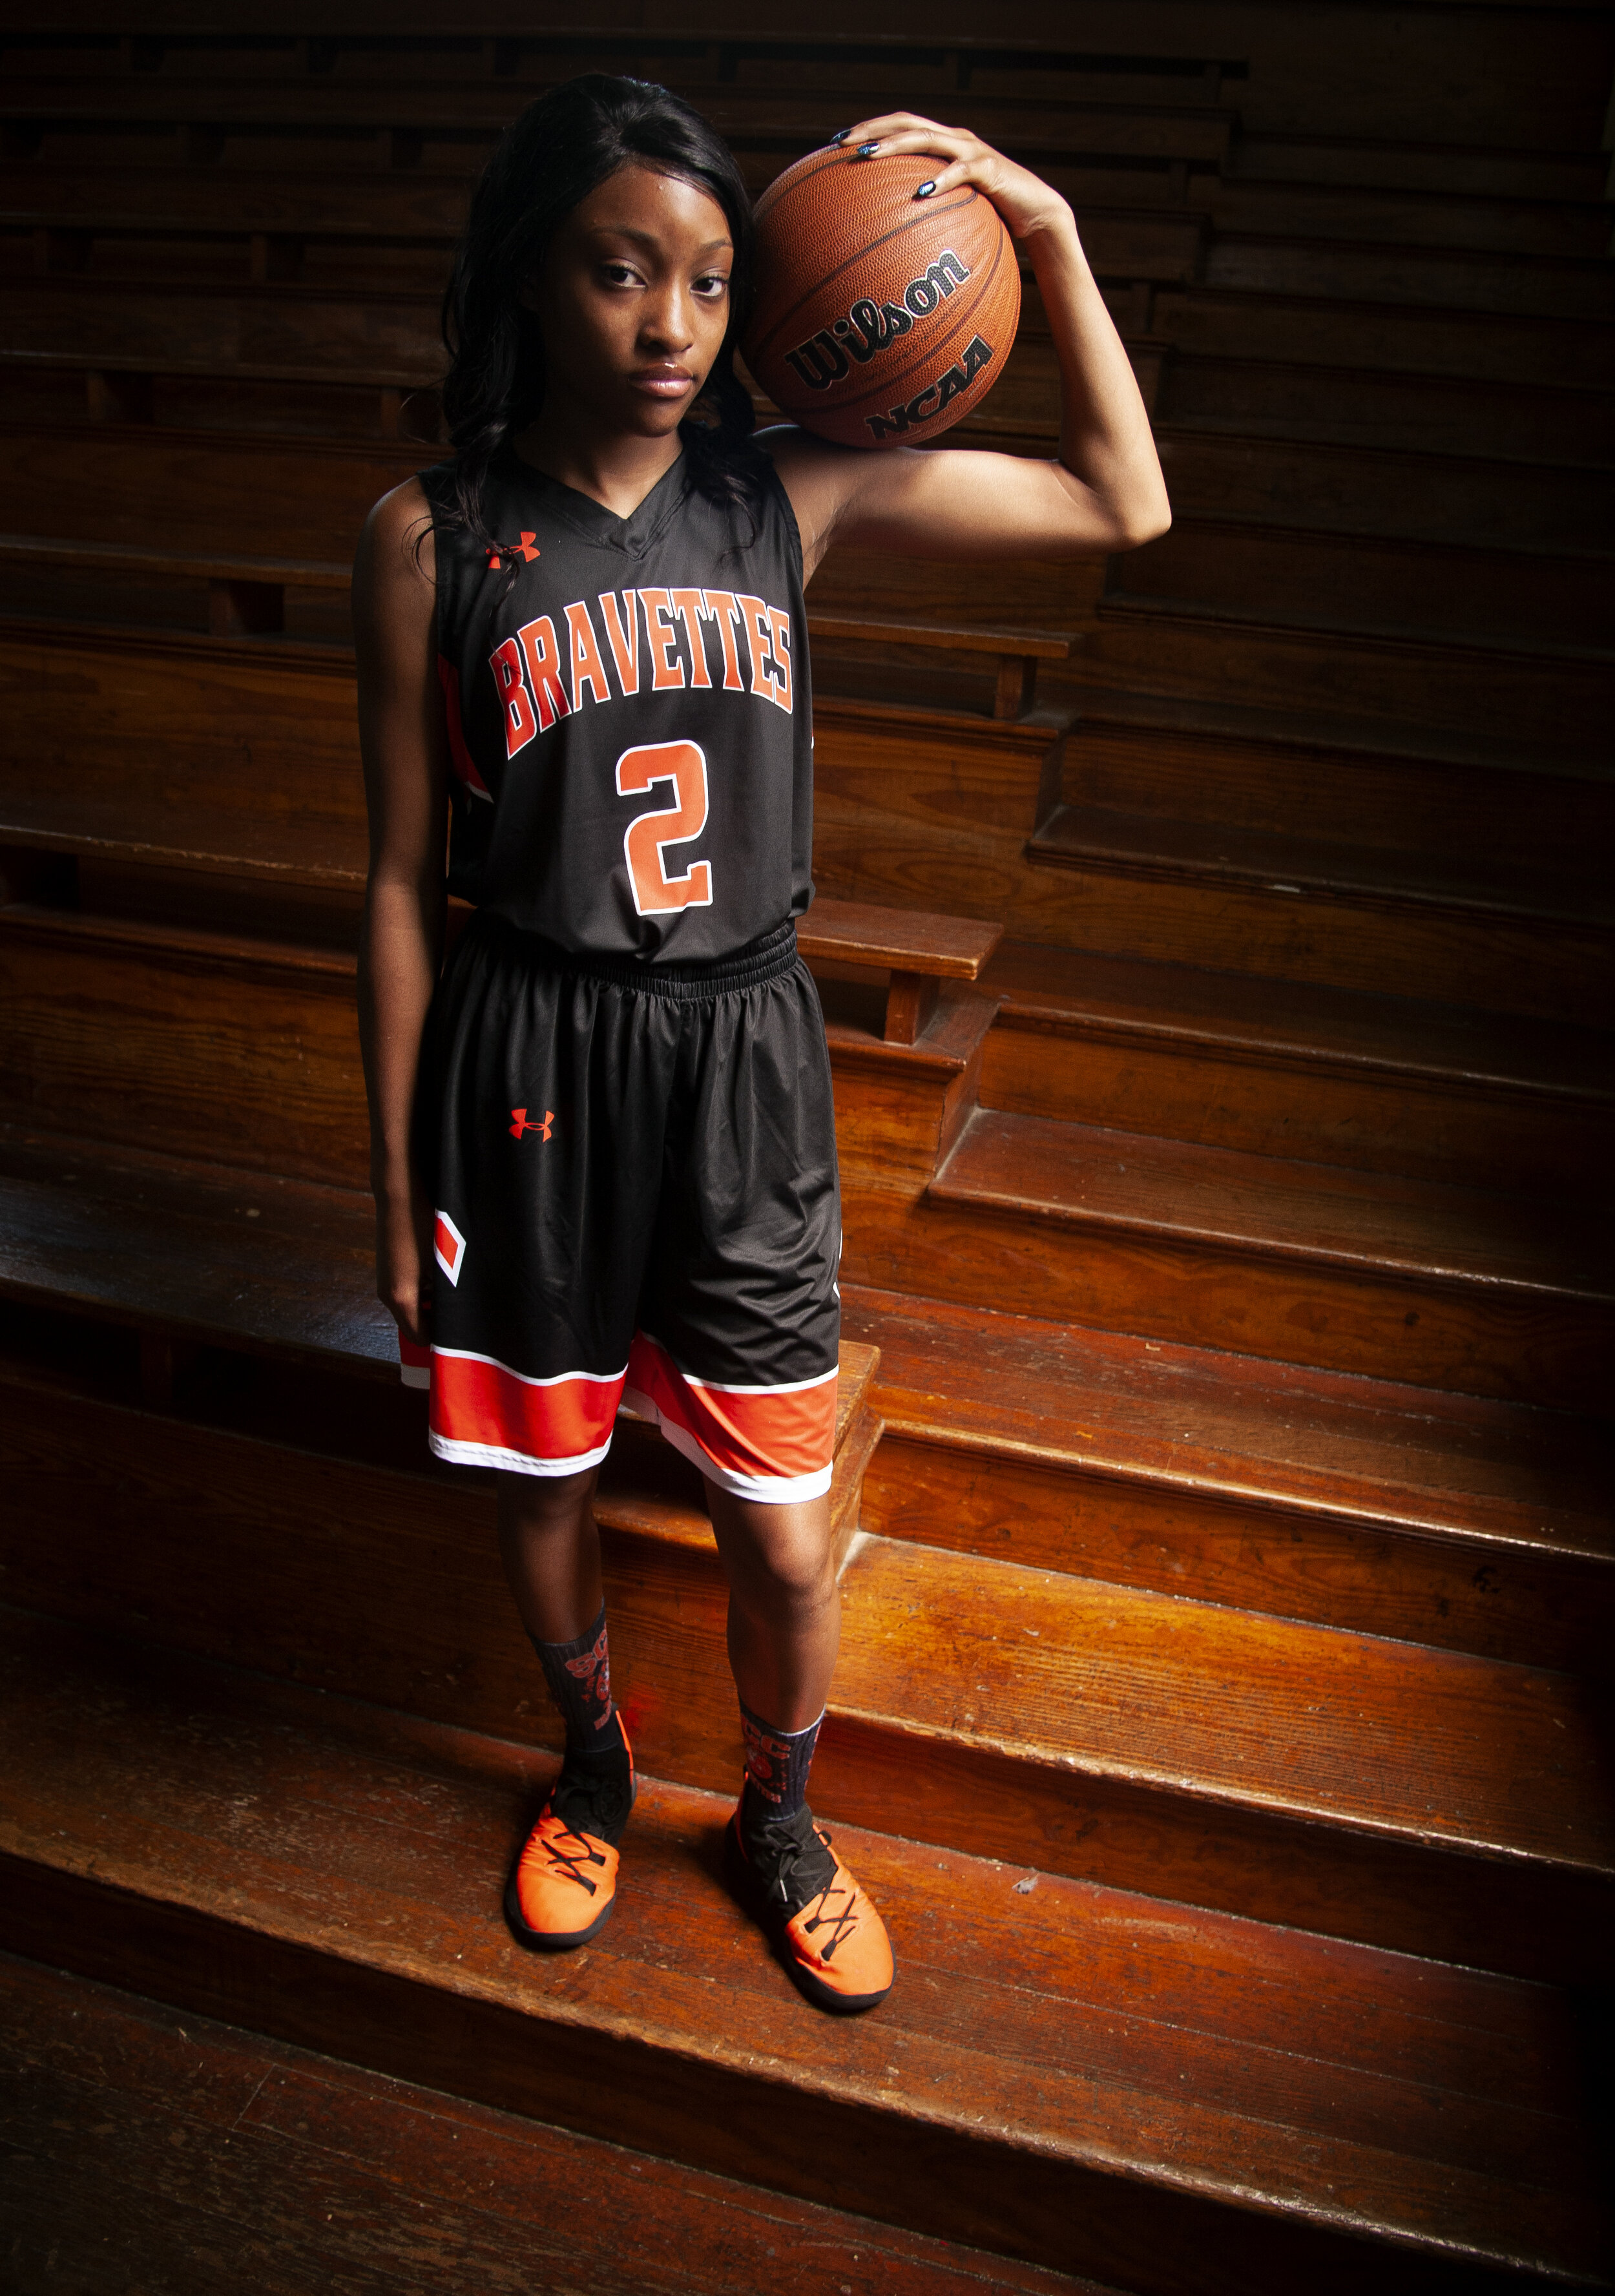  All-Missourian athlete, Scott County Central's Trinity Thomas, poses for a portrait Sunday, April 28, 2019, at the Old Jackson Gym in Jackson, Missouri.  